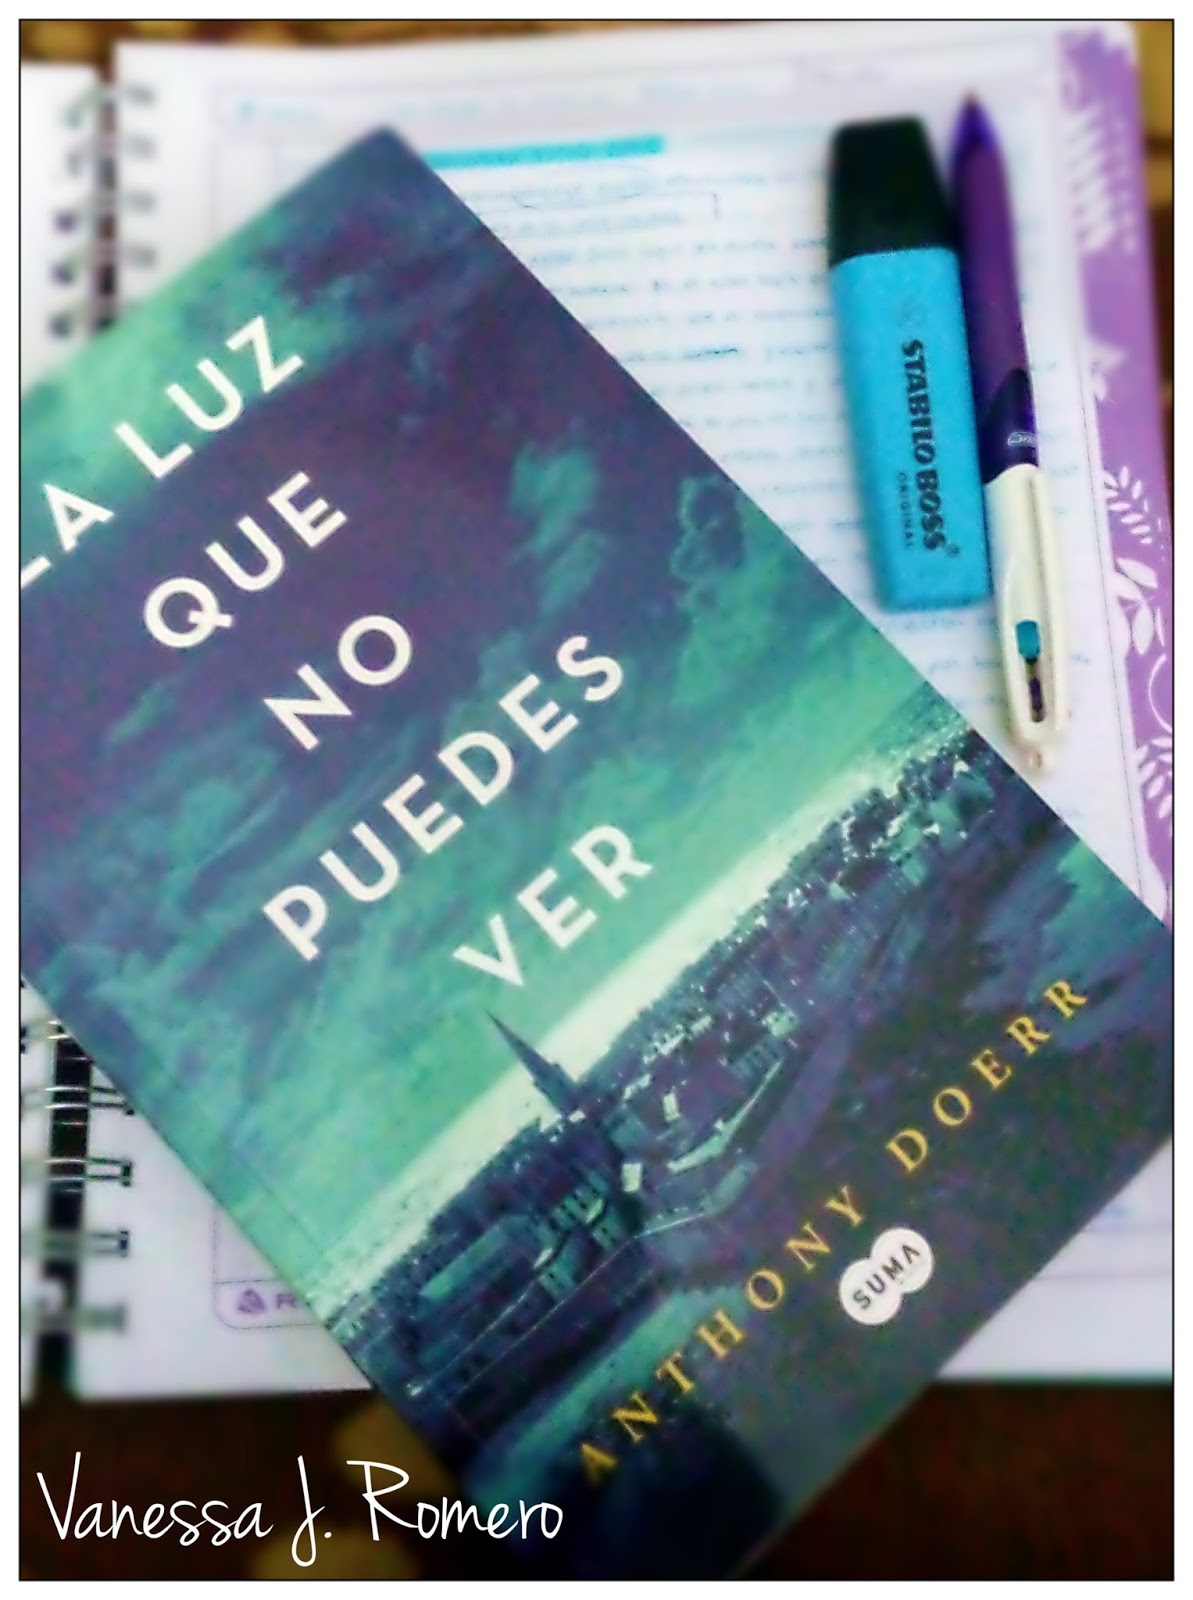  La luz que no puedes ver / All the Light We Cannot See (Spanish  Edition): 9788466343145: Doerr, Anthony: Libros